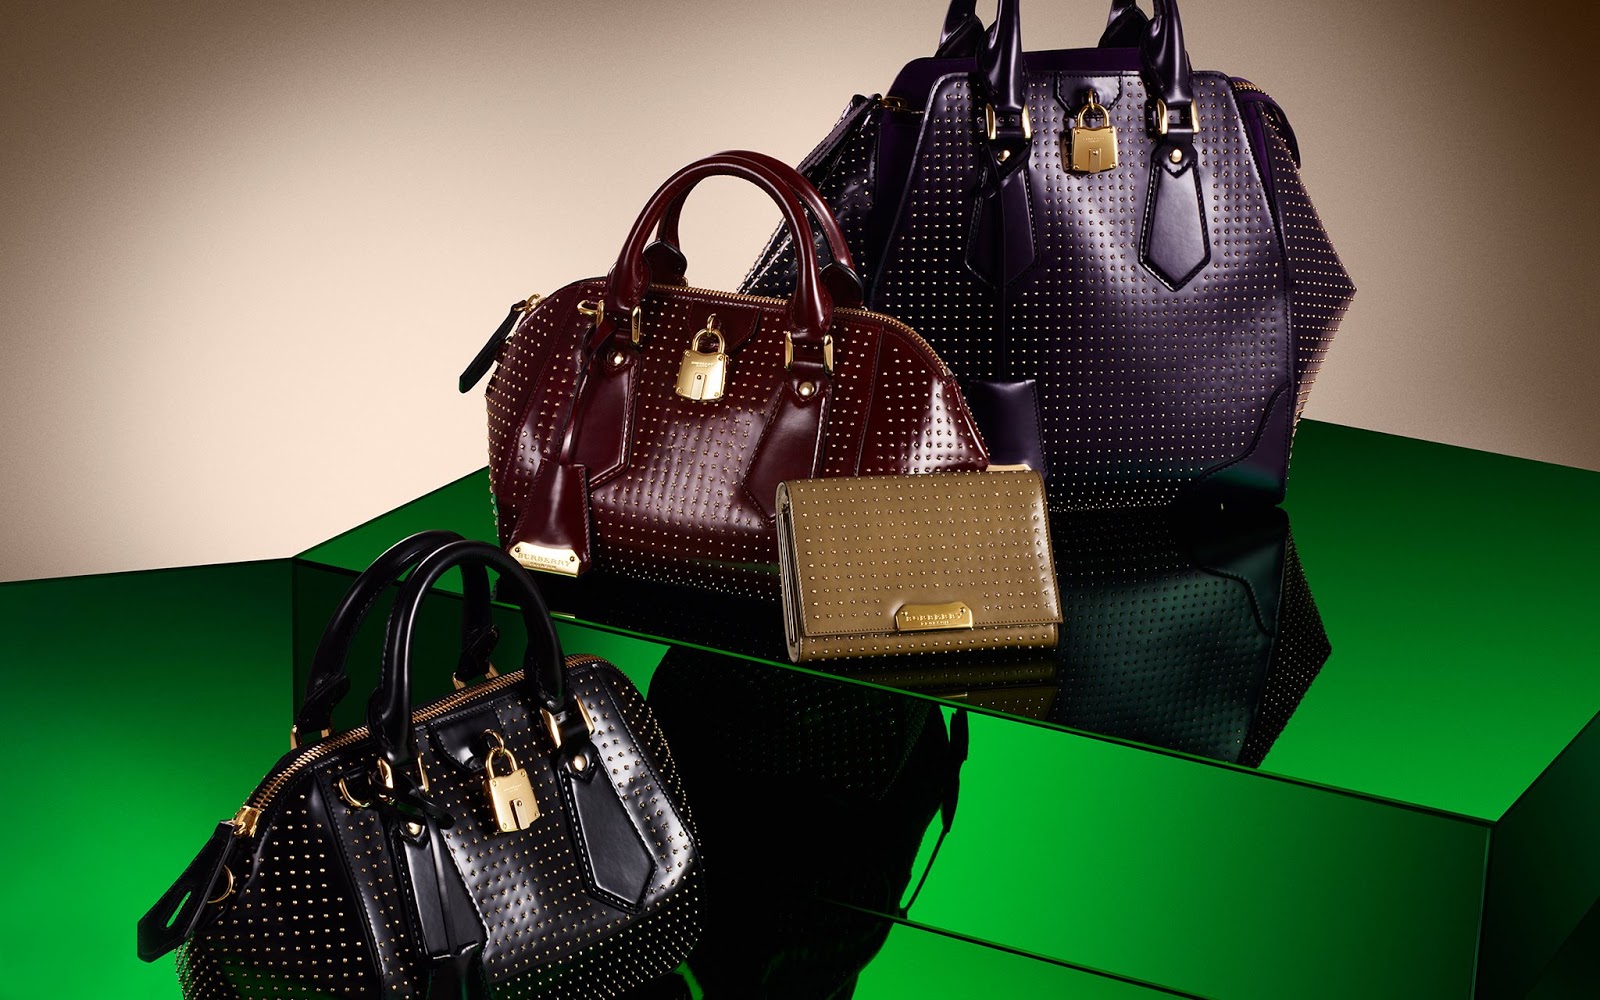 Tata Jazz Blog: Burberry A\W 2013-2014 accessories collection